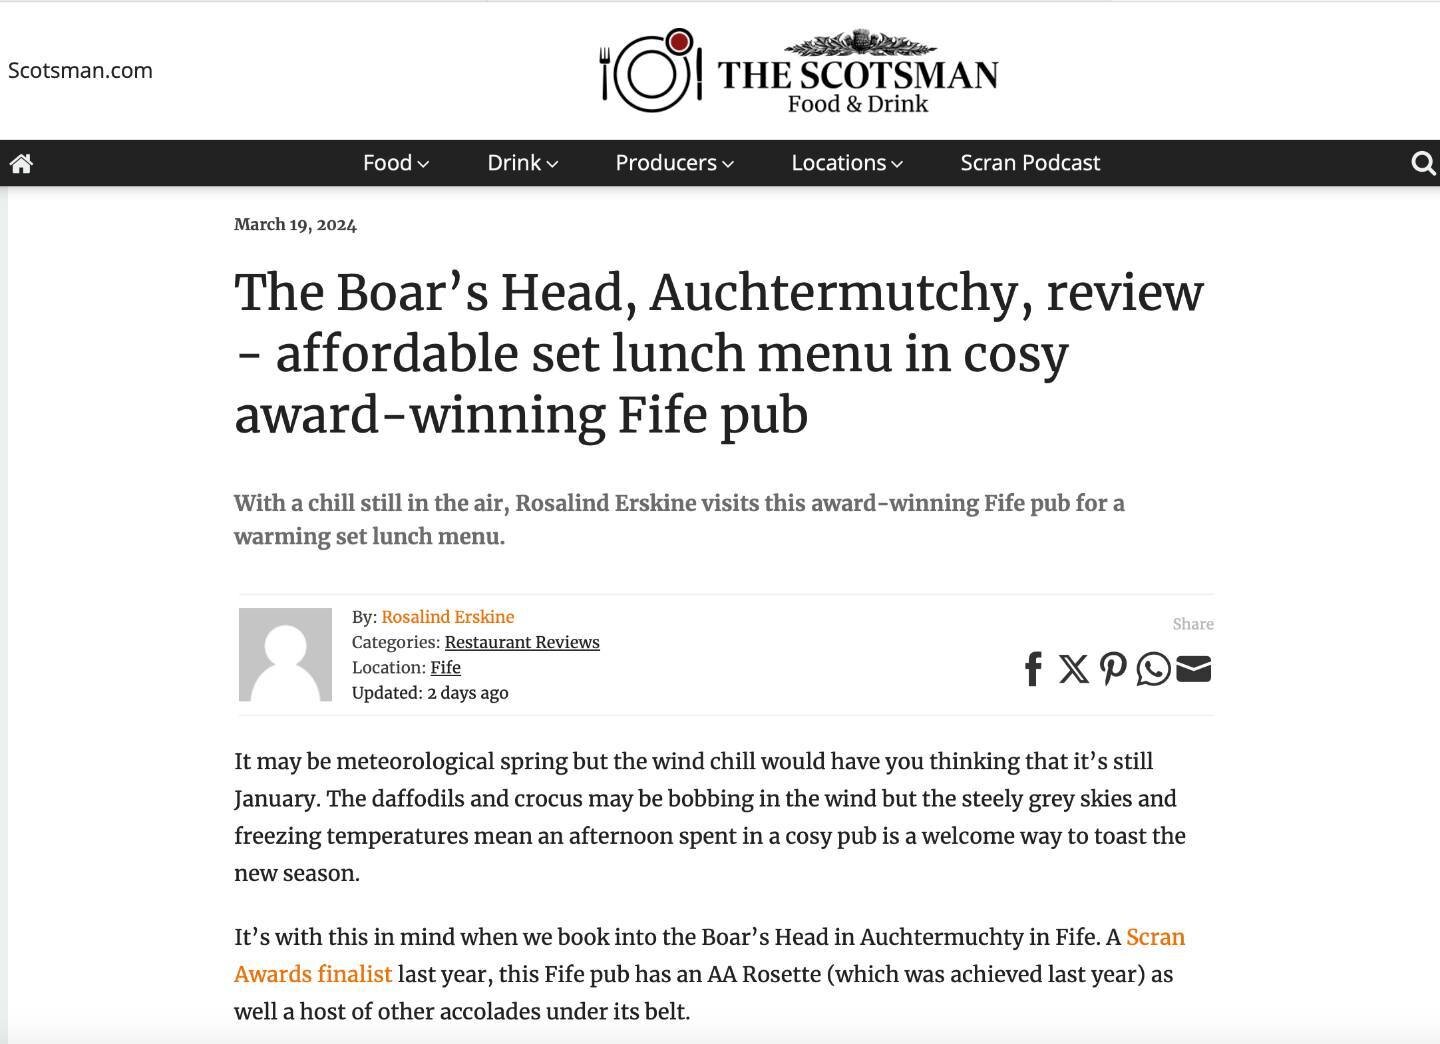 📰 We're thrilled to share that we've received a glowing review in The Scotsman! Unfortunately, we haven't been able to grab a copy ourselves. 

🗞️ Tag anyone you know who reads The Scotsman, and if they bring us the paper, we'll treat the first 10 